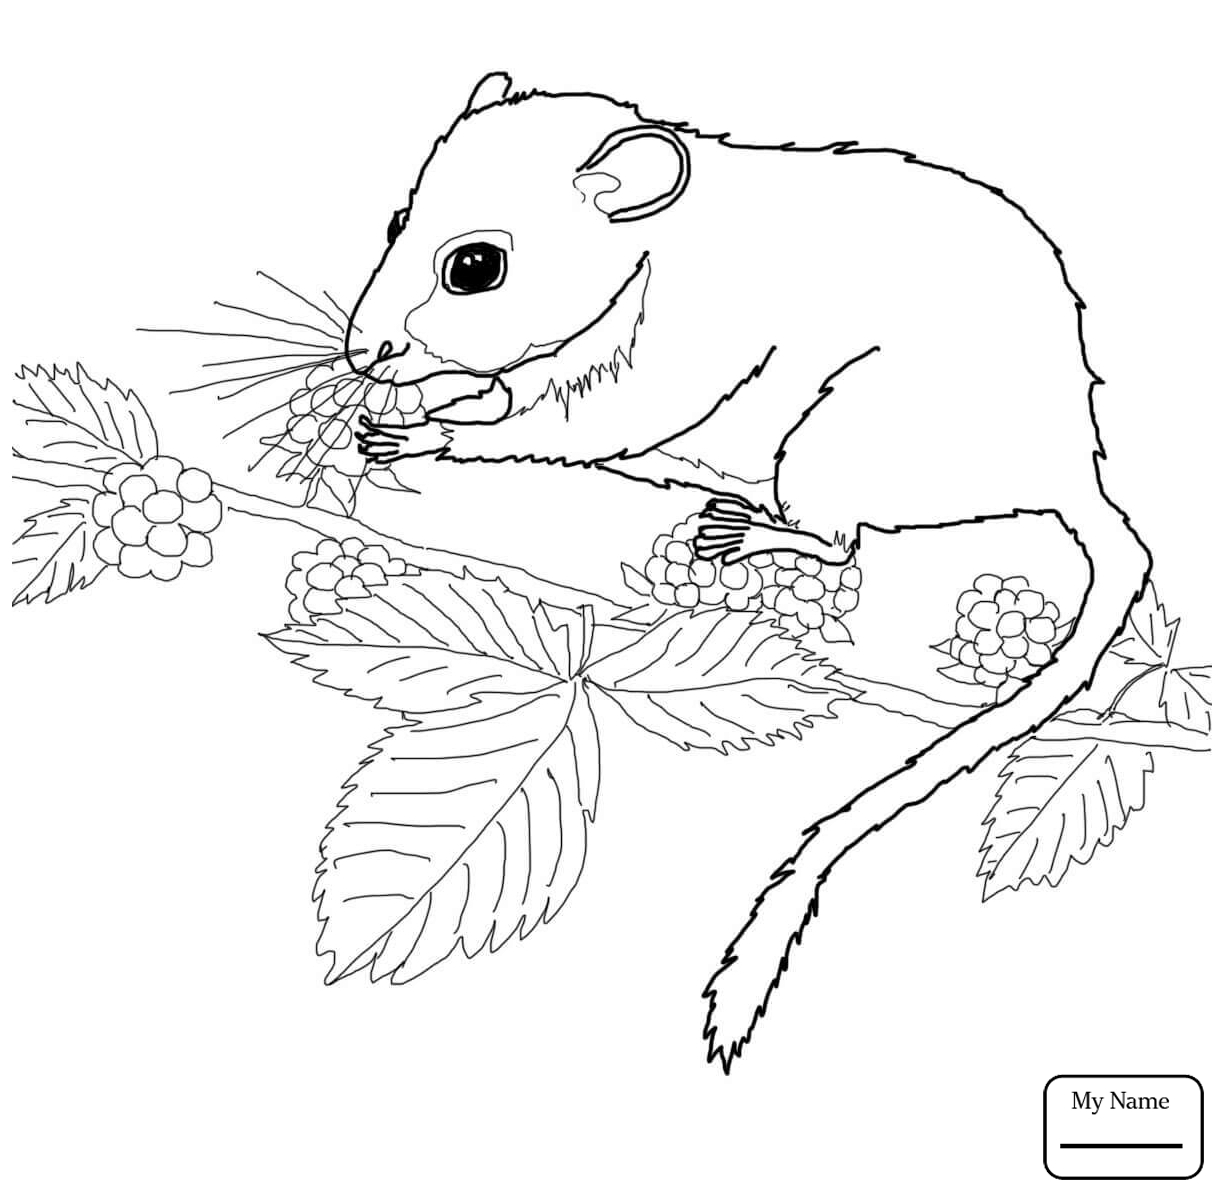 Cute Mouse Coloring Page at GetDrawings.com | Free for personal use